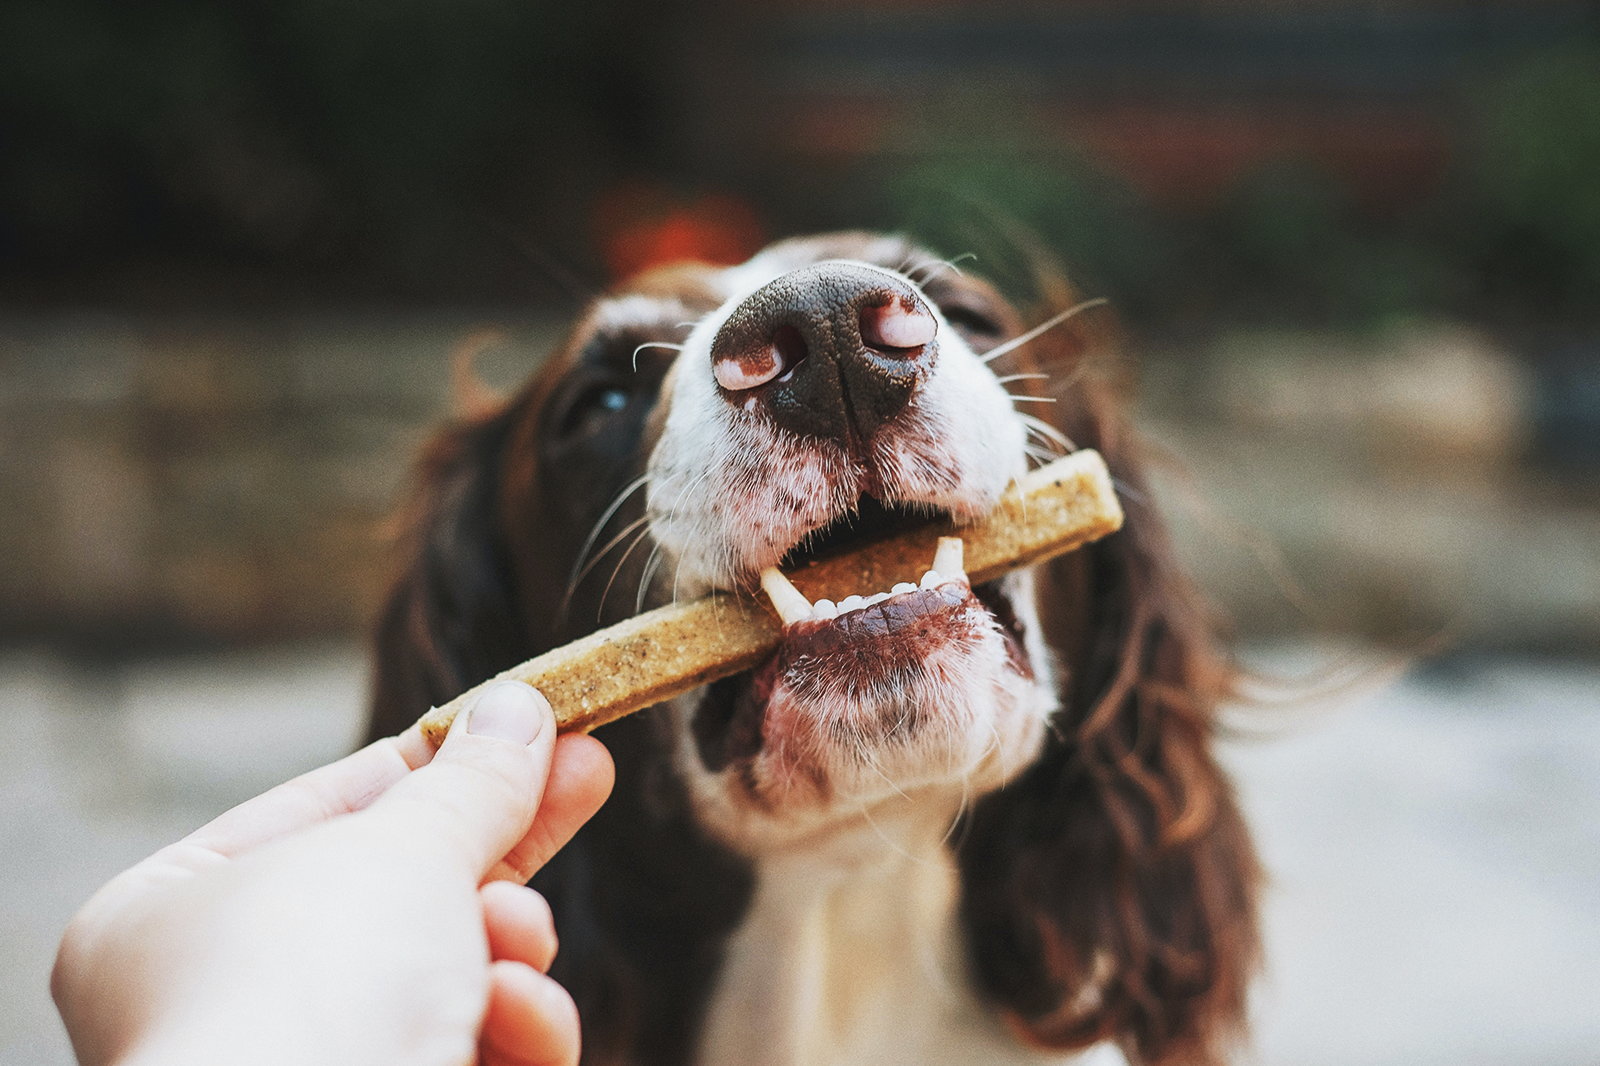 Person holds a dog treat while the dog bites it.